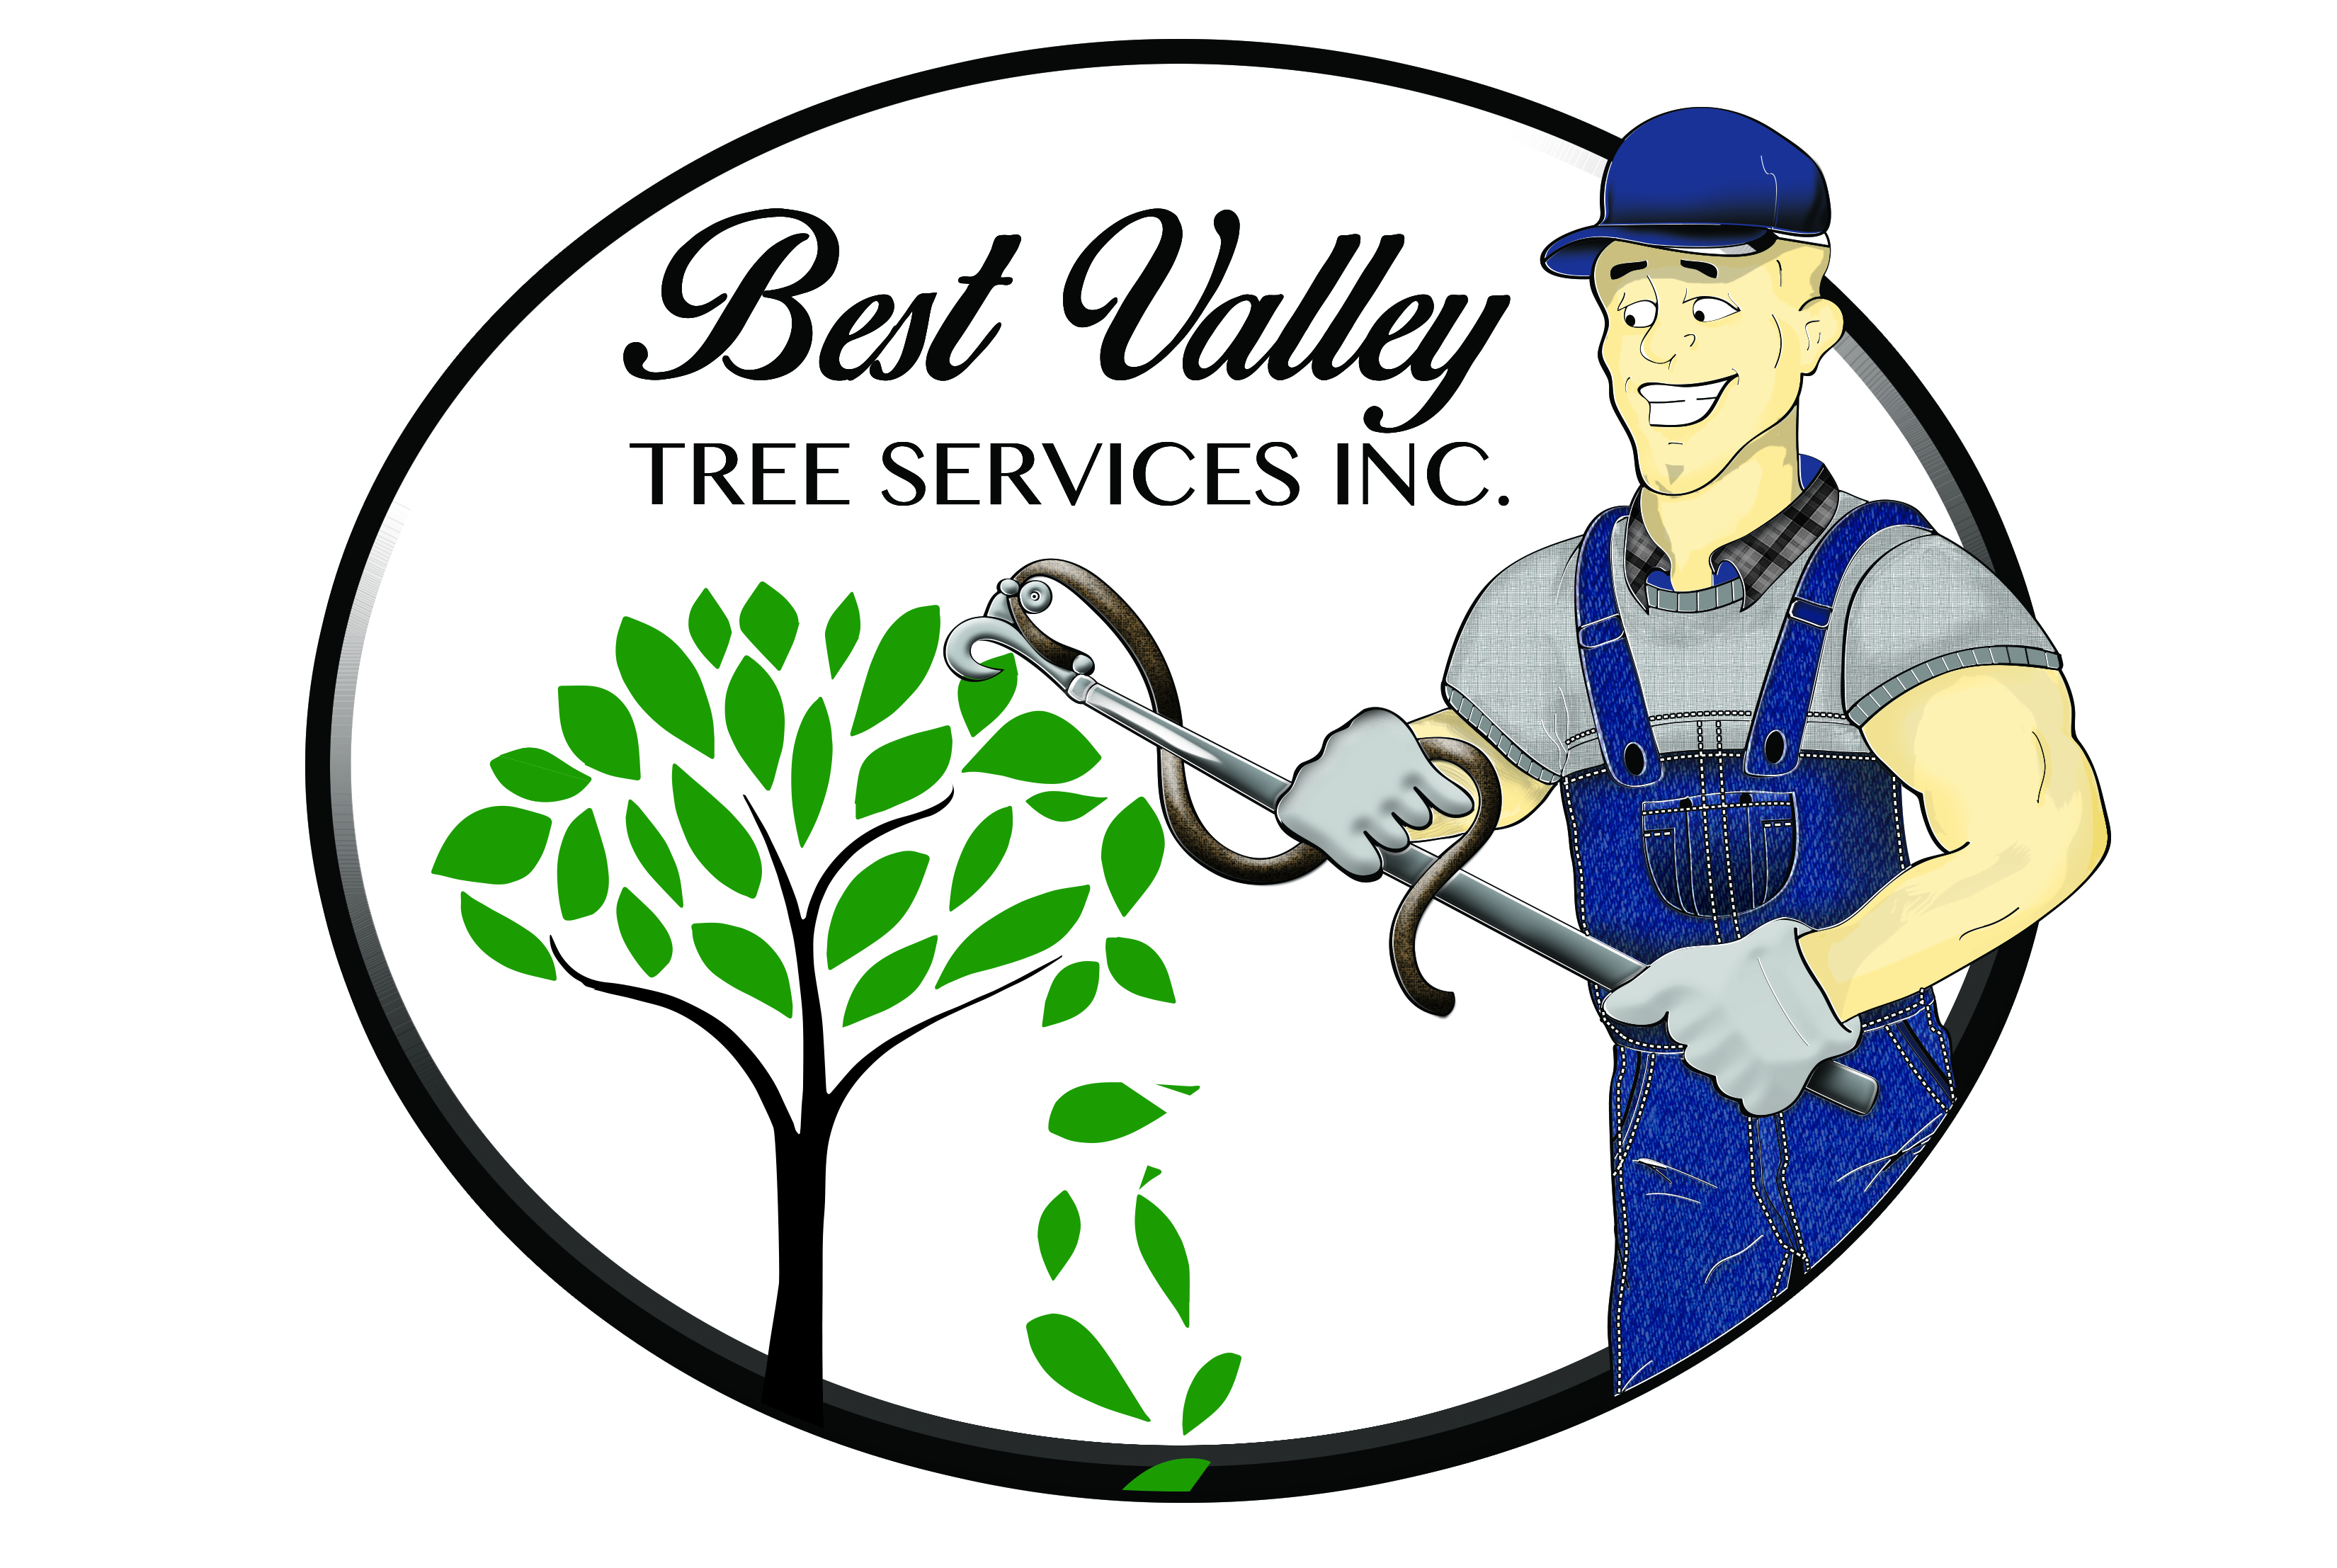 Best Valley Tree Services, Inc. Logo